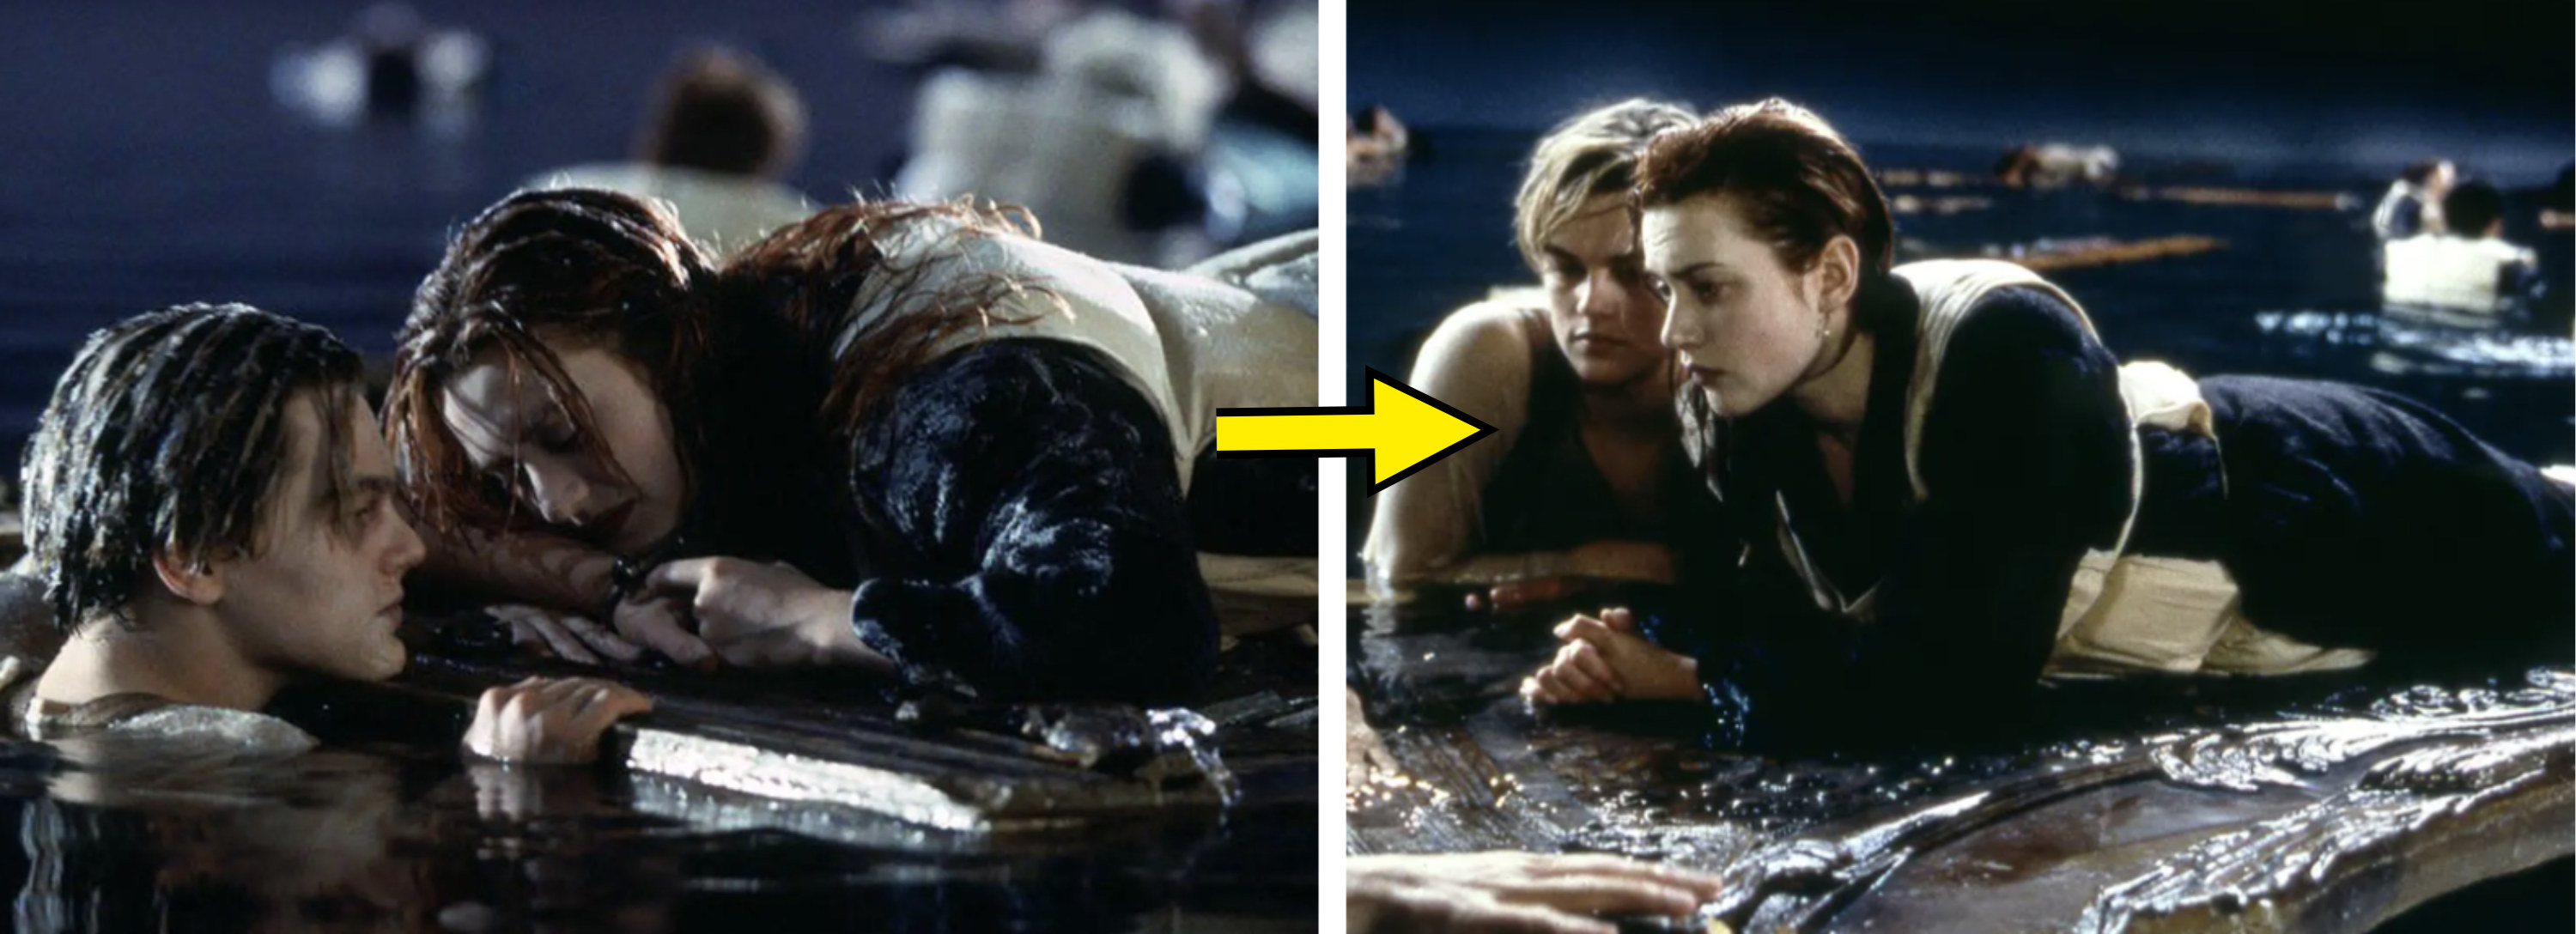 on the left rose from titanic on the door in the water with jack holding on the edge. on the right both jack and rose on the door in the water.